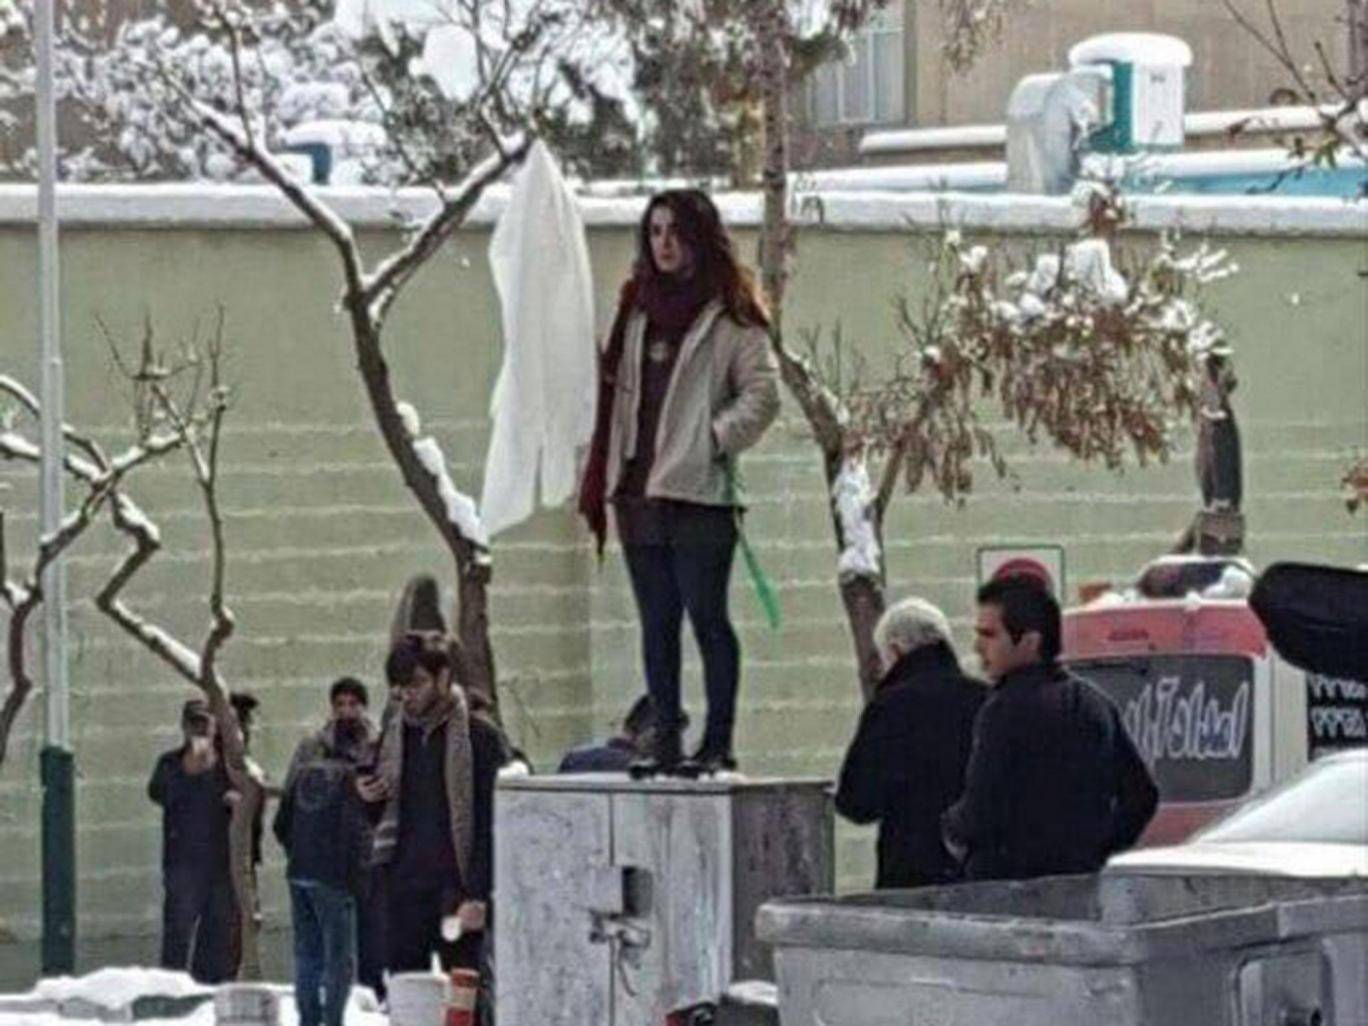 Iranian women take off headscarves to protest veil law